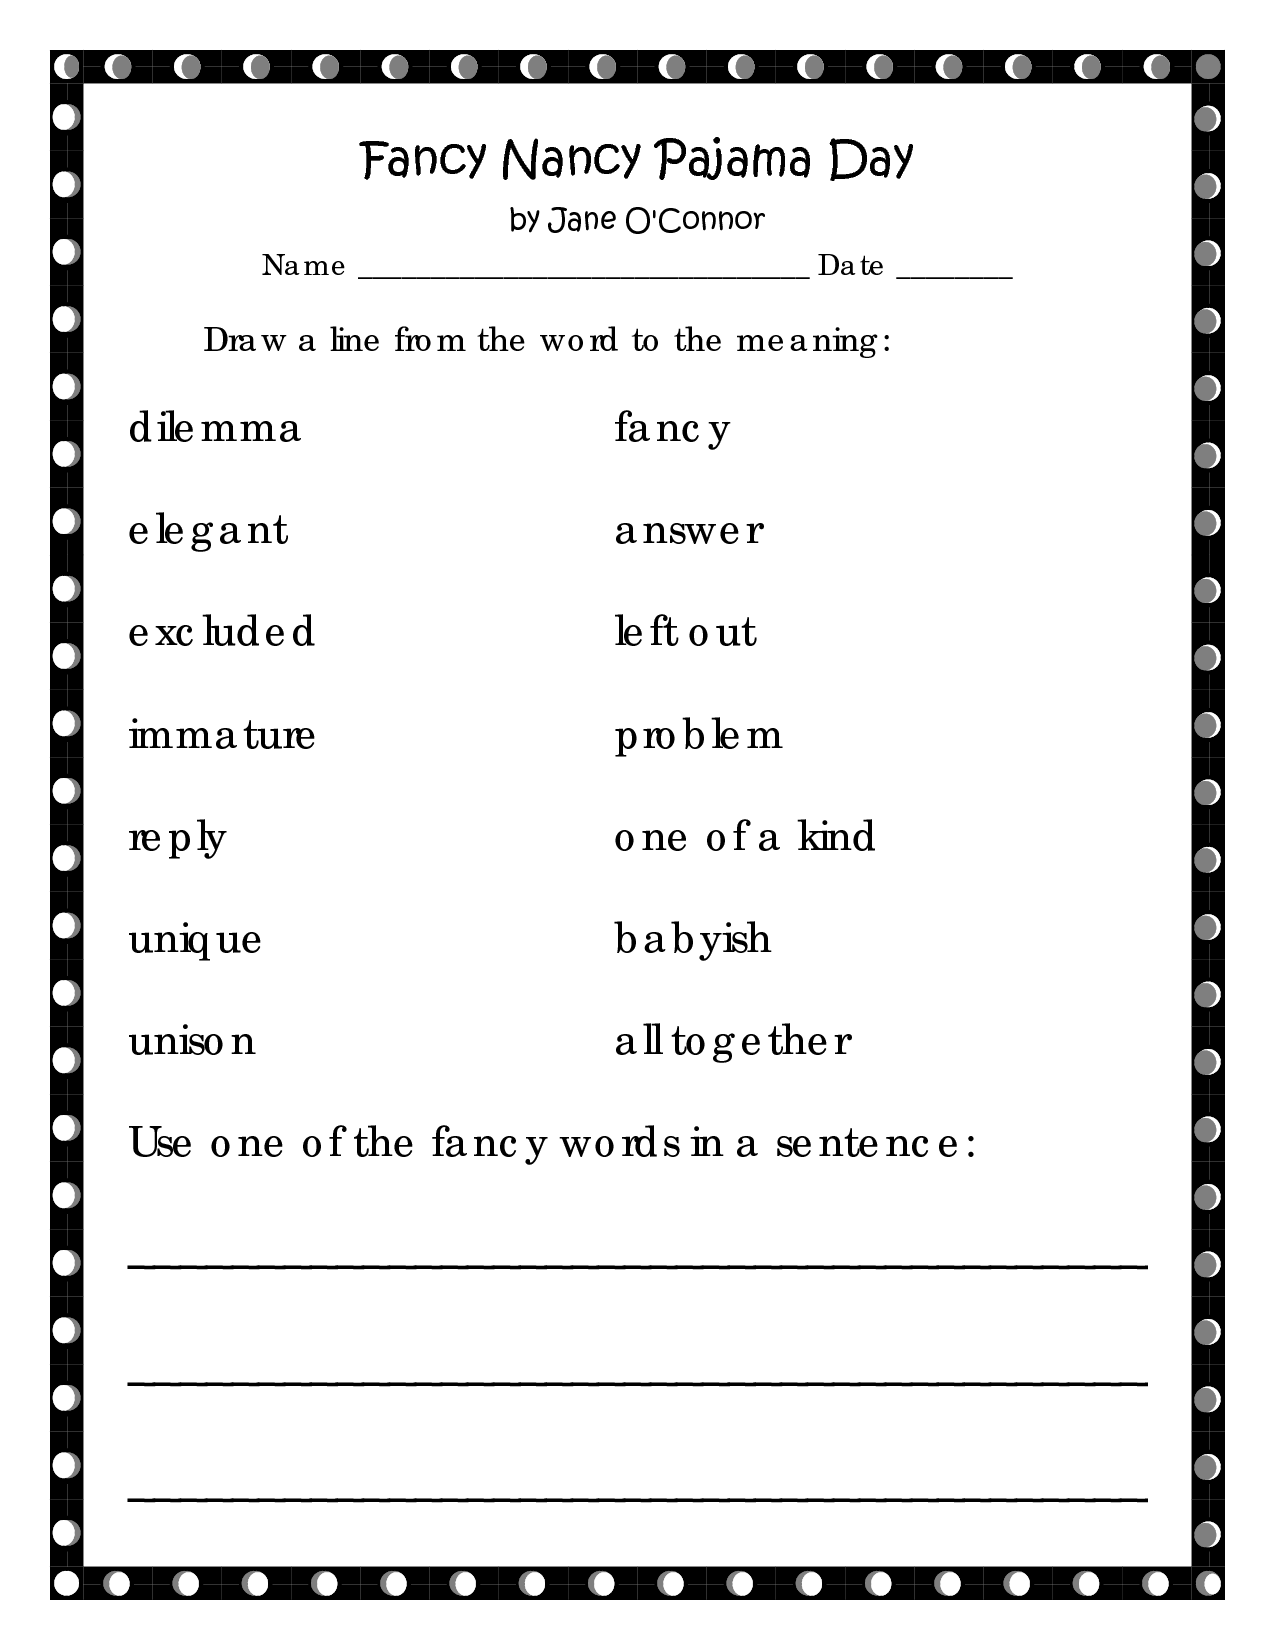 Pajama day activity pages